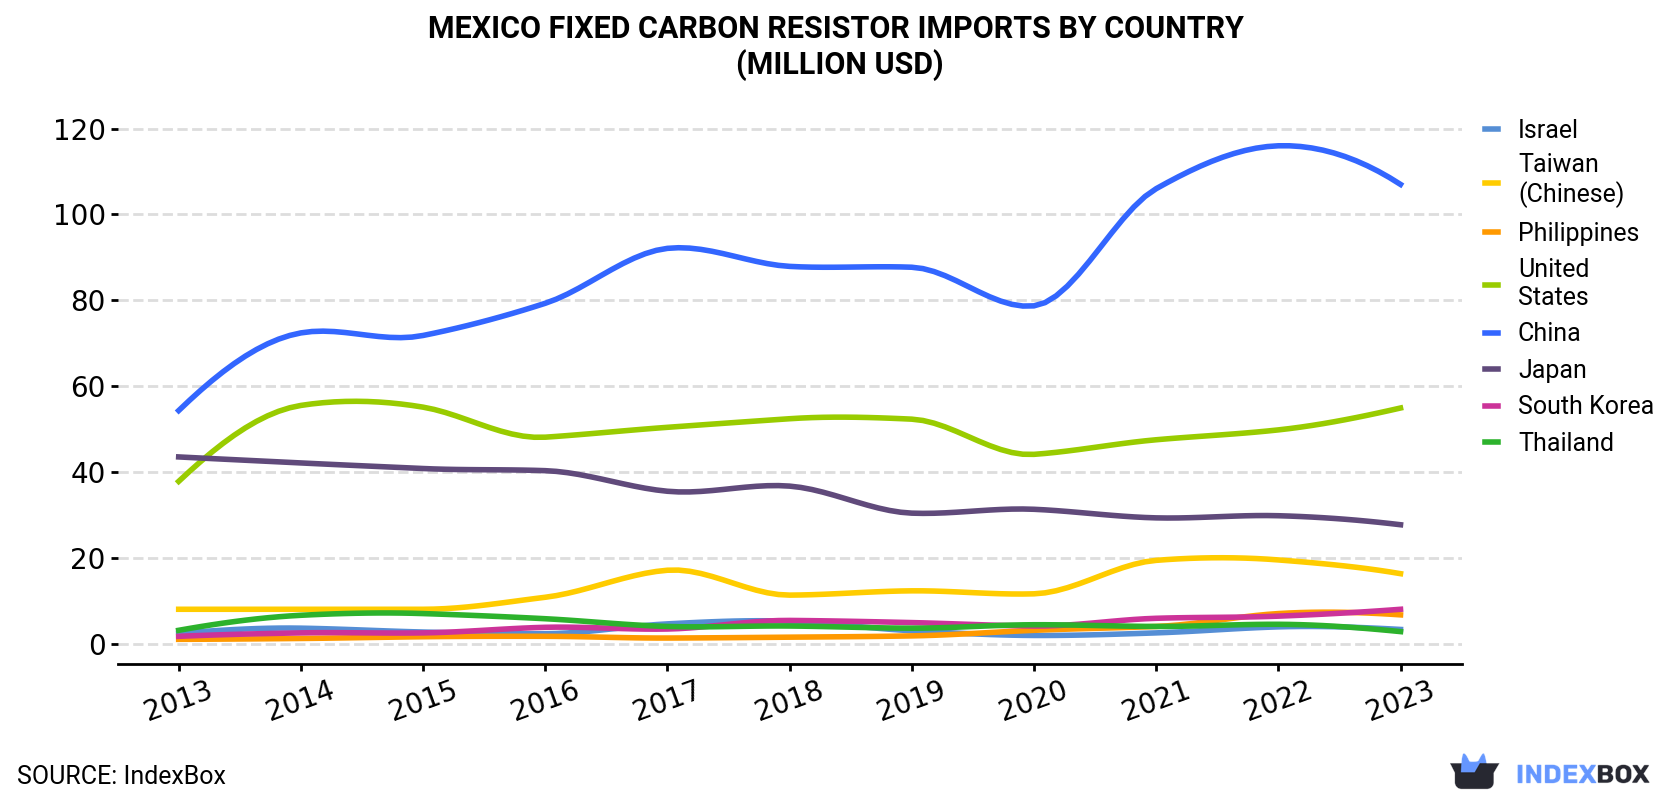 Mexico Fixed Carbon Resistor Imports By Country (Million USD)